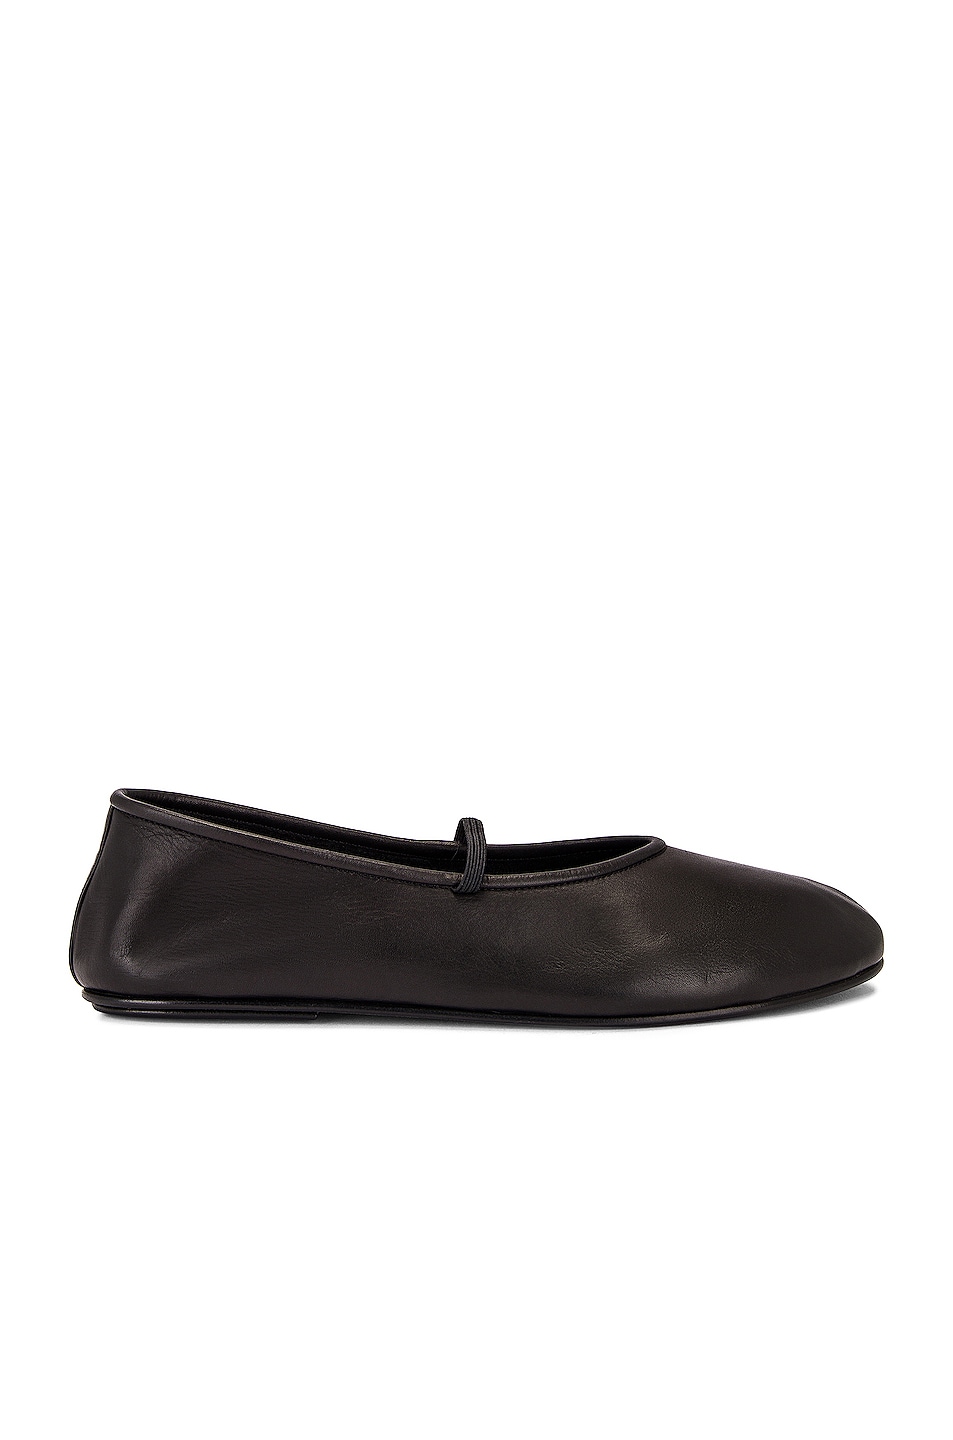 Image 1 of The Row Elastic Ballet Flats in Black